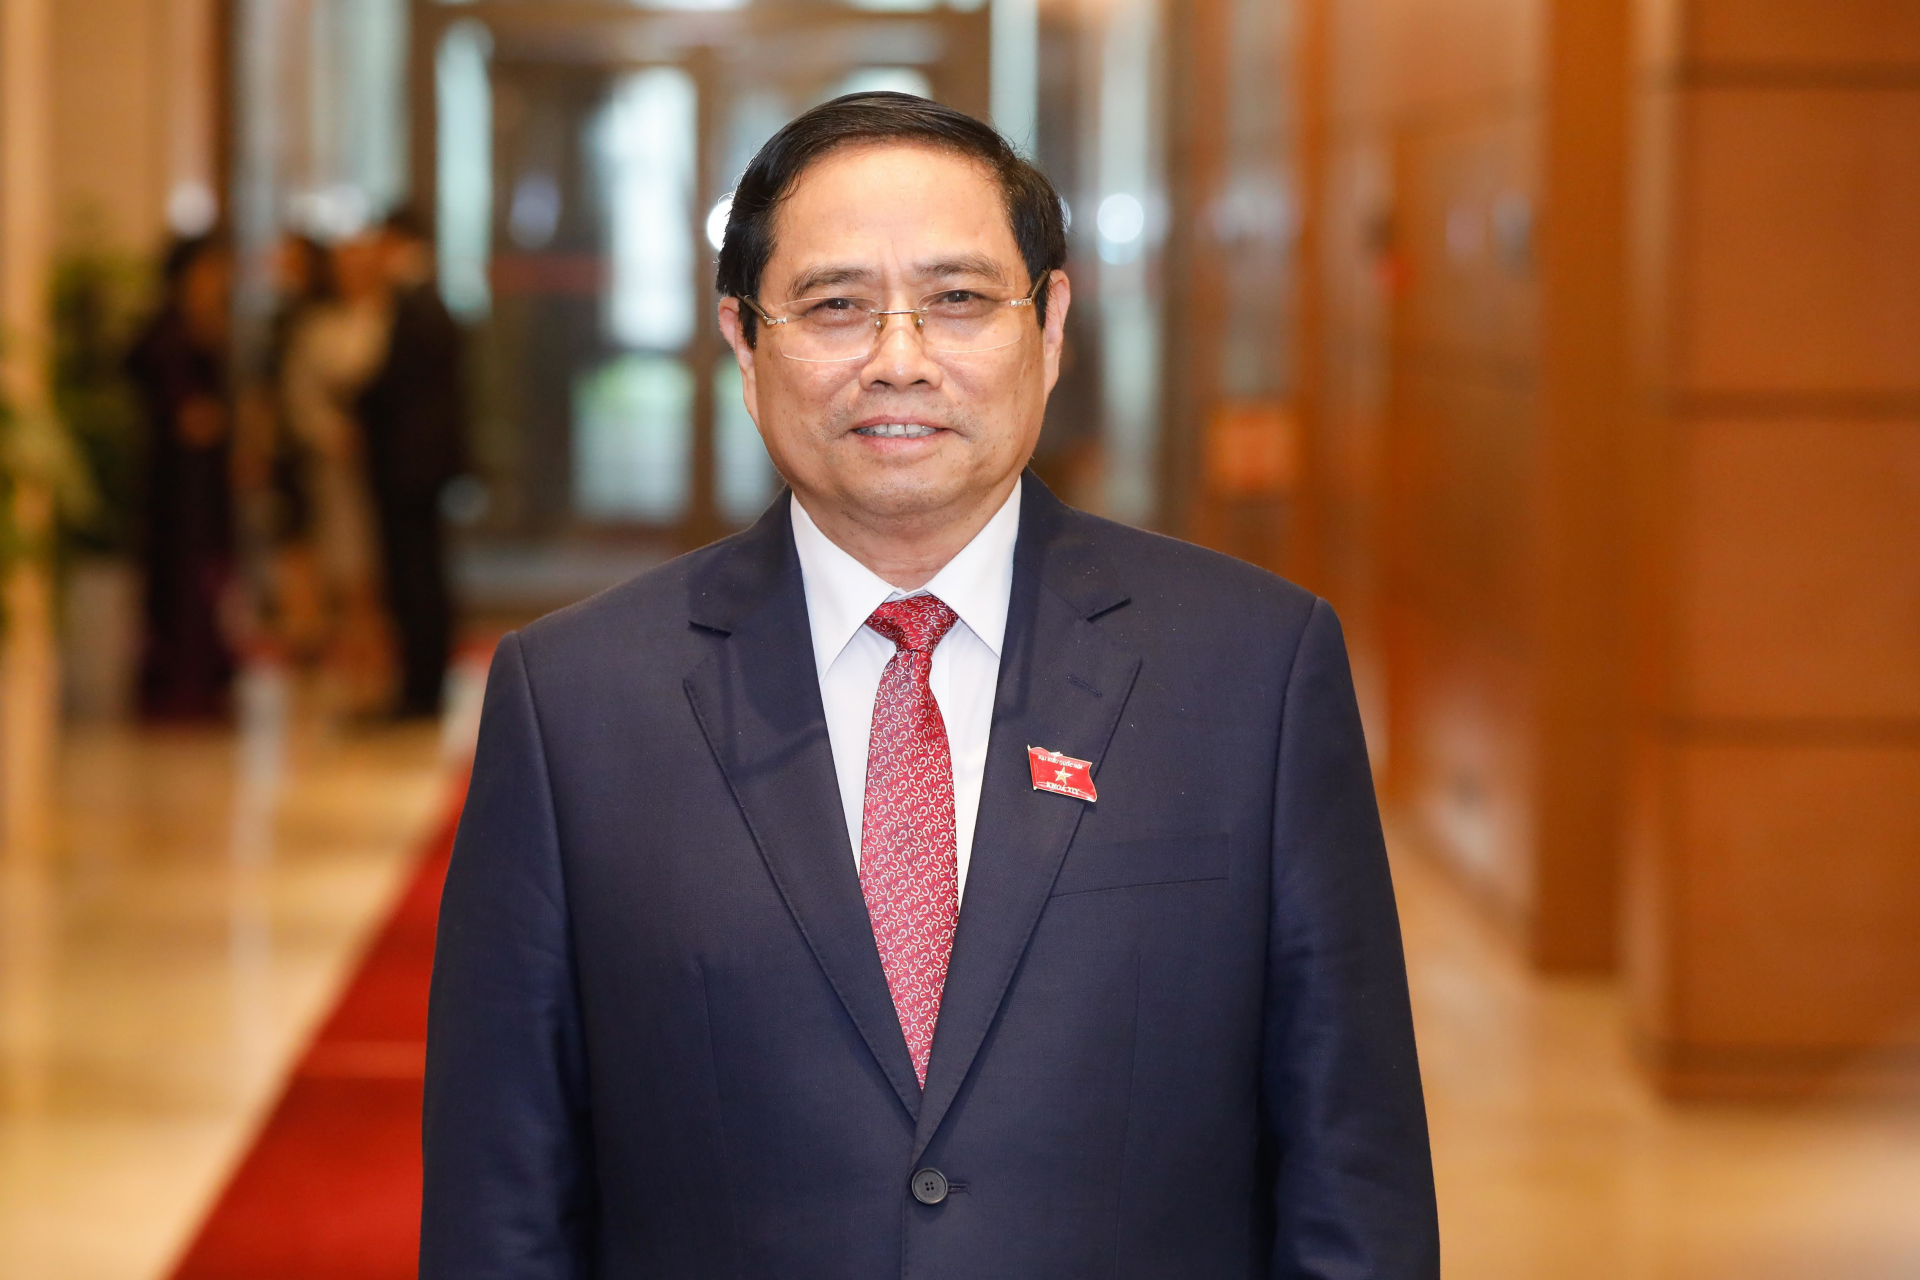 Pham Minh Chinh elected as Prime Minister of Vietnam